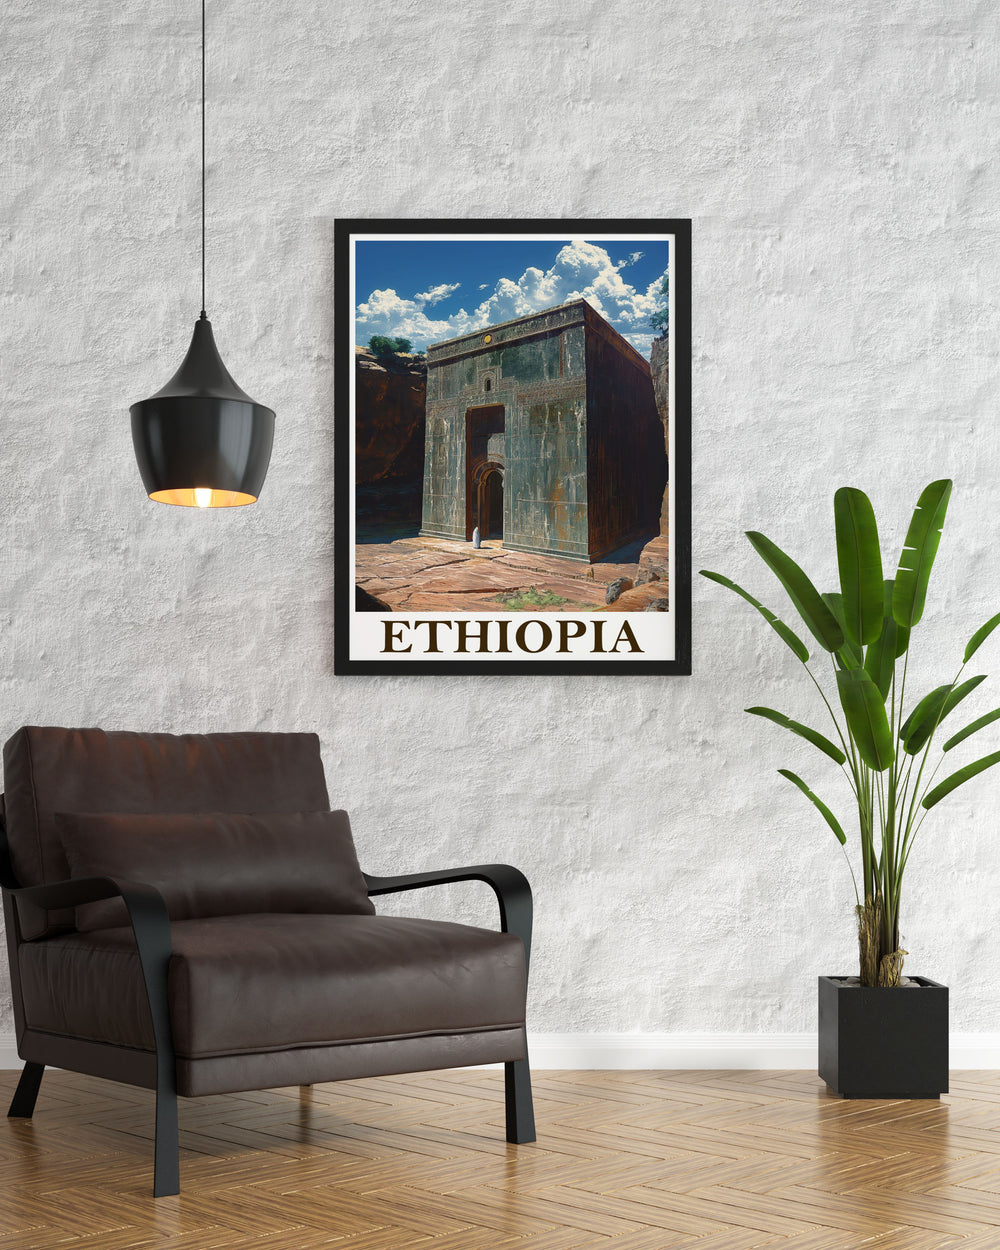 Stunning Ethiopia Wall Art depicting the Lalibela Rock Hewn Churches in vibrant colors and fine lines ideal for enhancing your living room office or bedroom with a piece of Ethiopias rich cultural and spiritual legacy